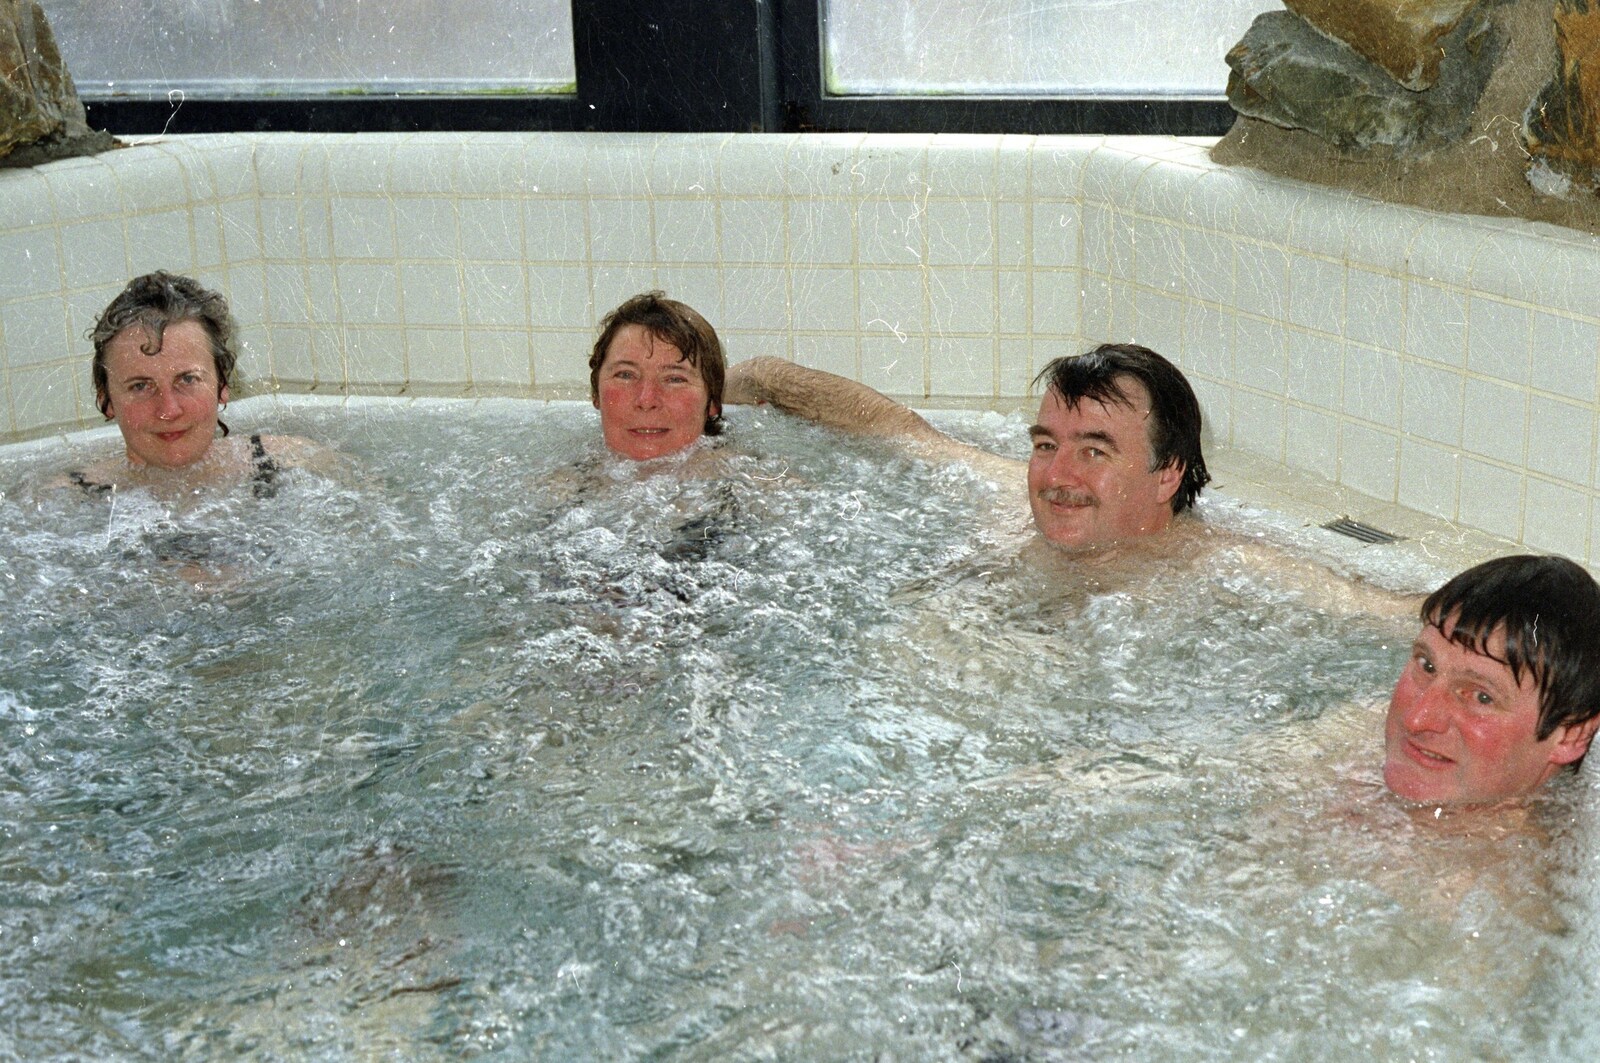 A Trip to Center Parcs, Eemhof, Netherlands - 24th March 1992: Time for a jacuzzi